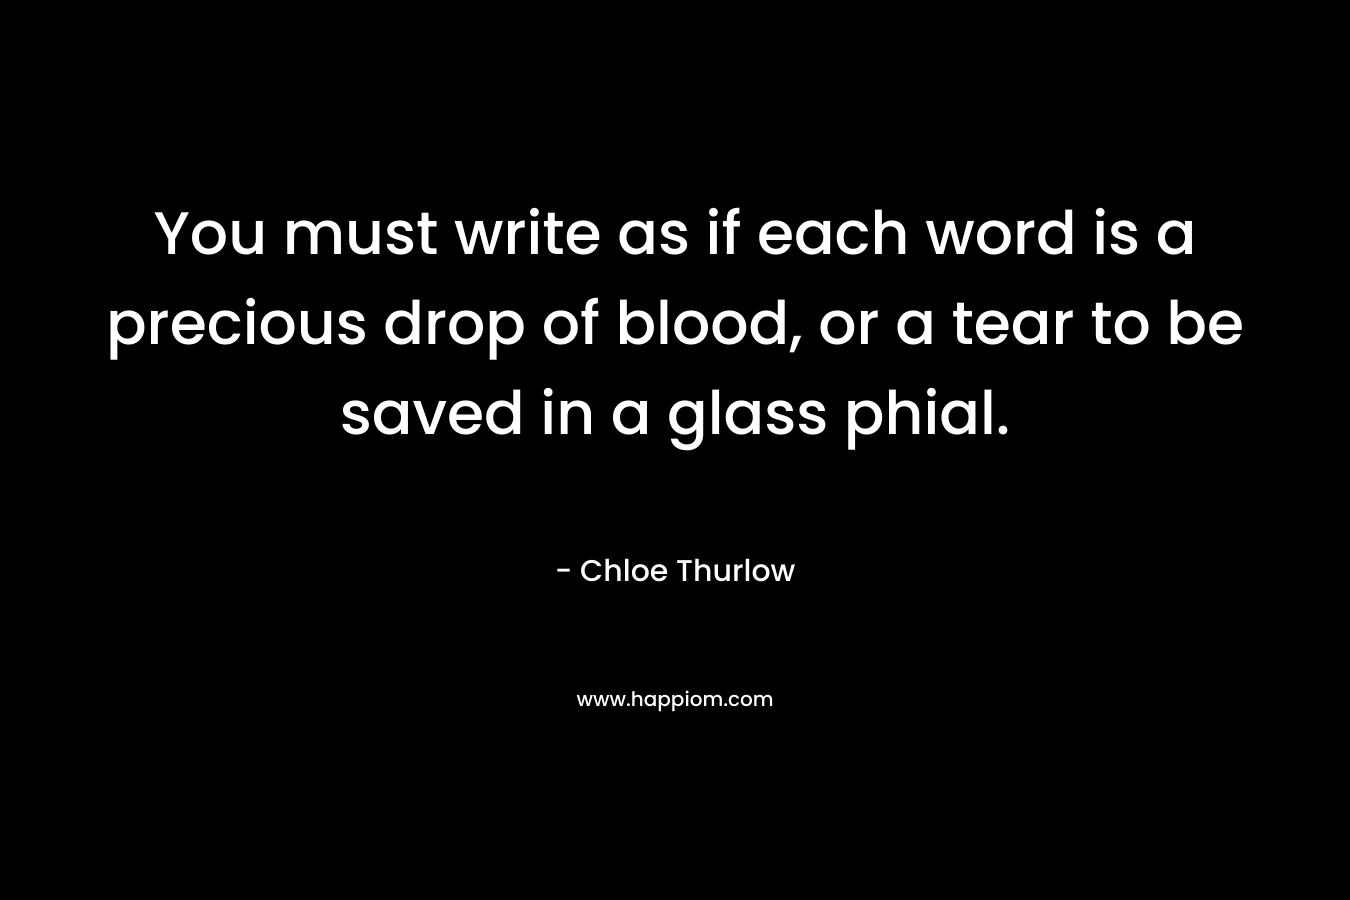 You must write as if each word is a precious drop of blood, or a tear to be saved in a glass phial.